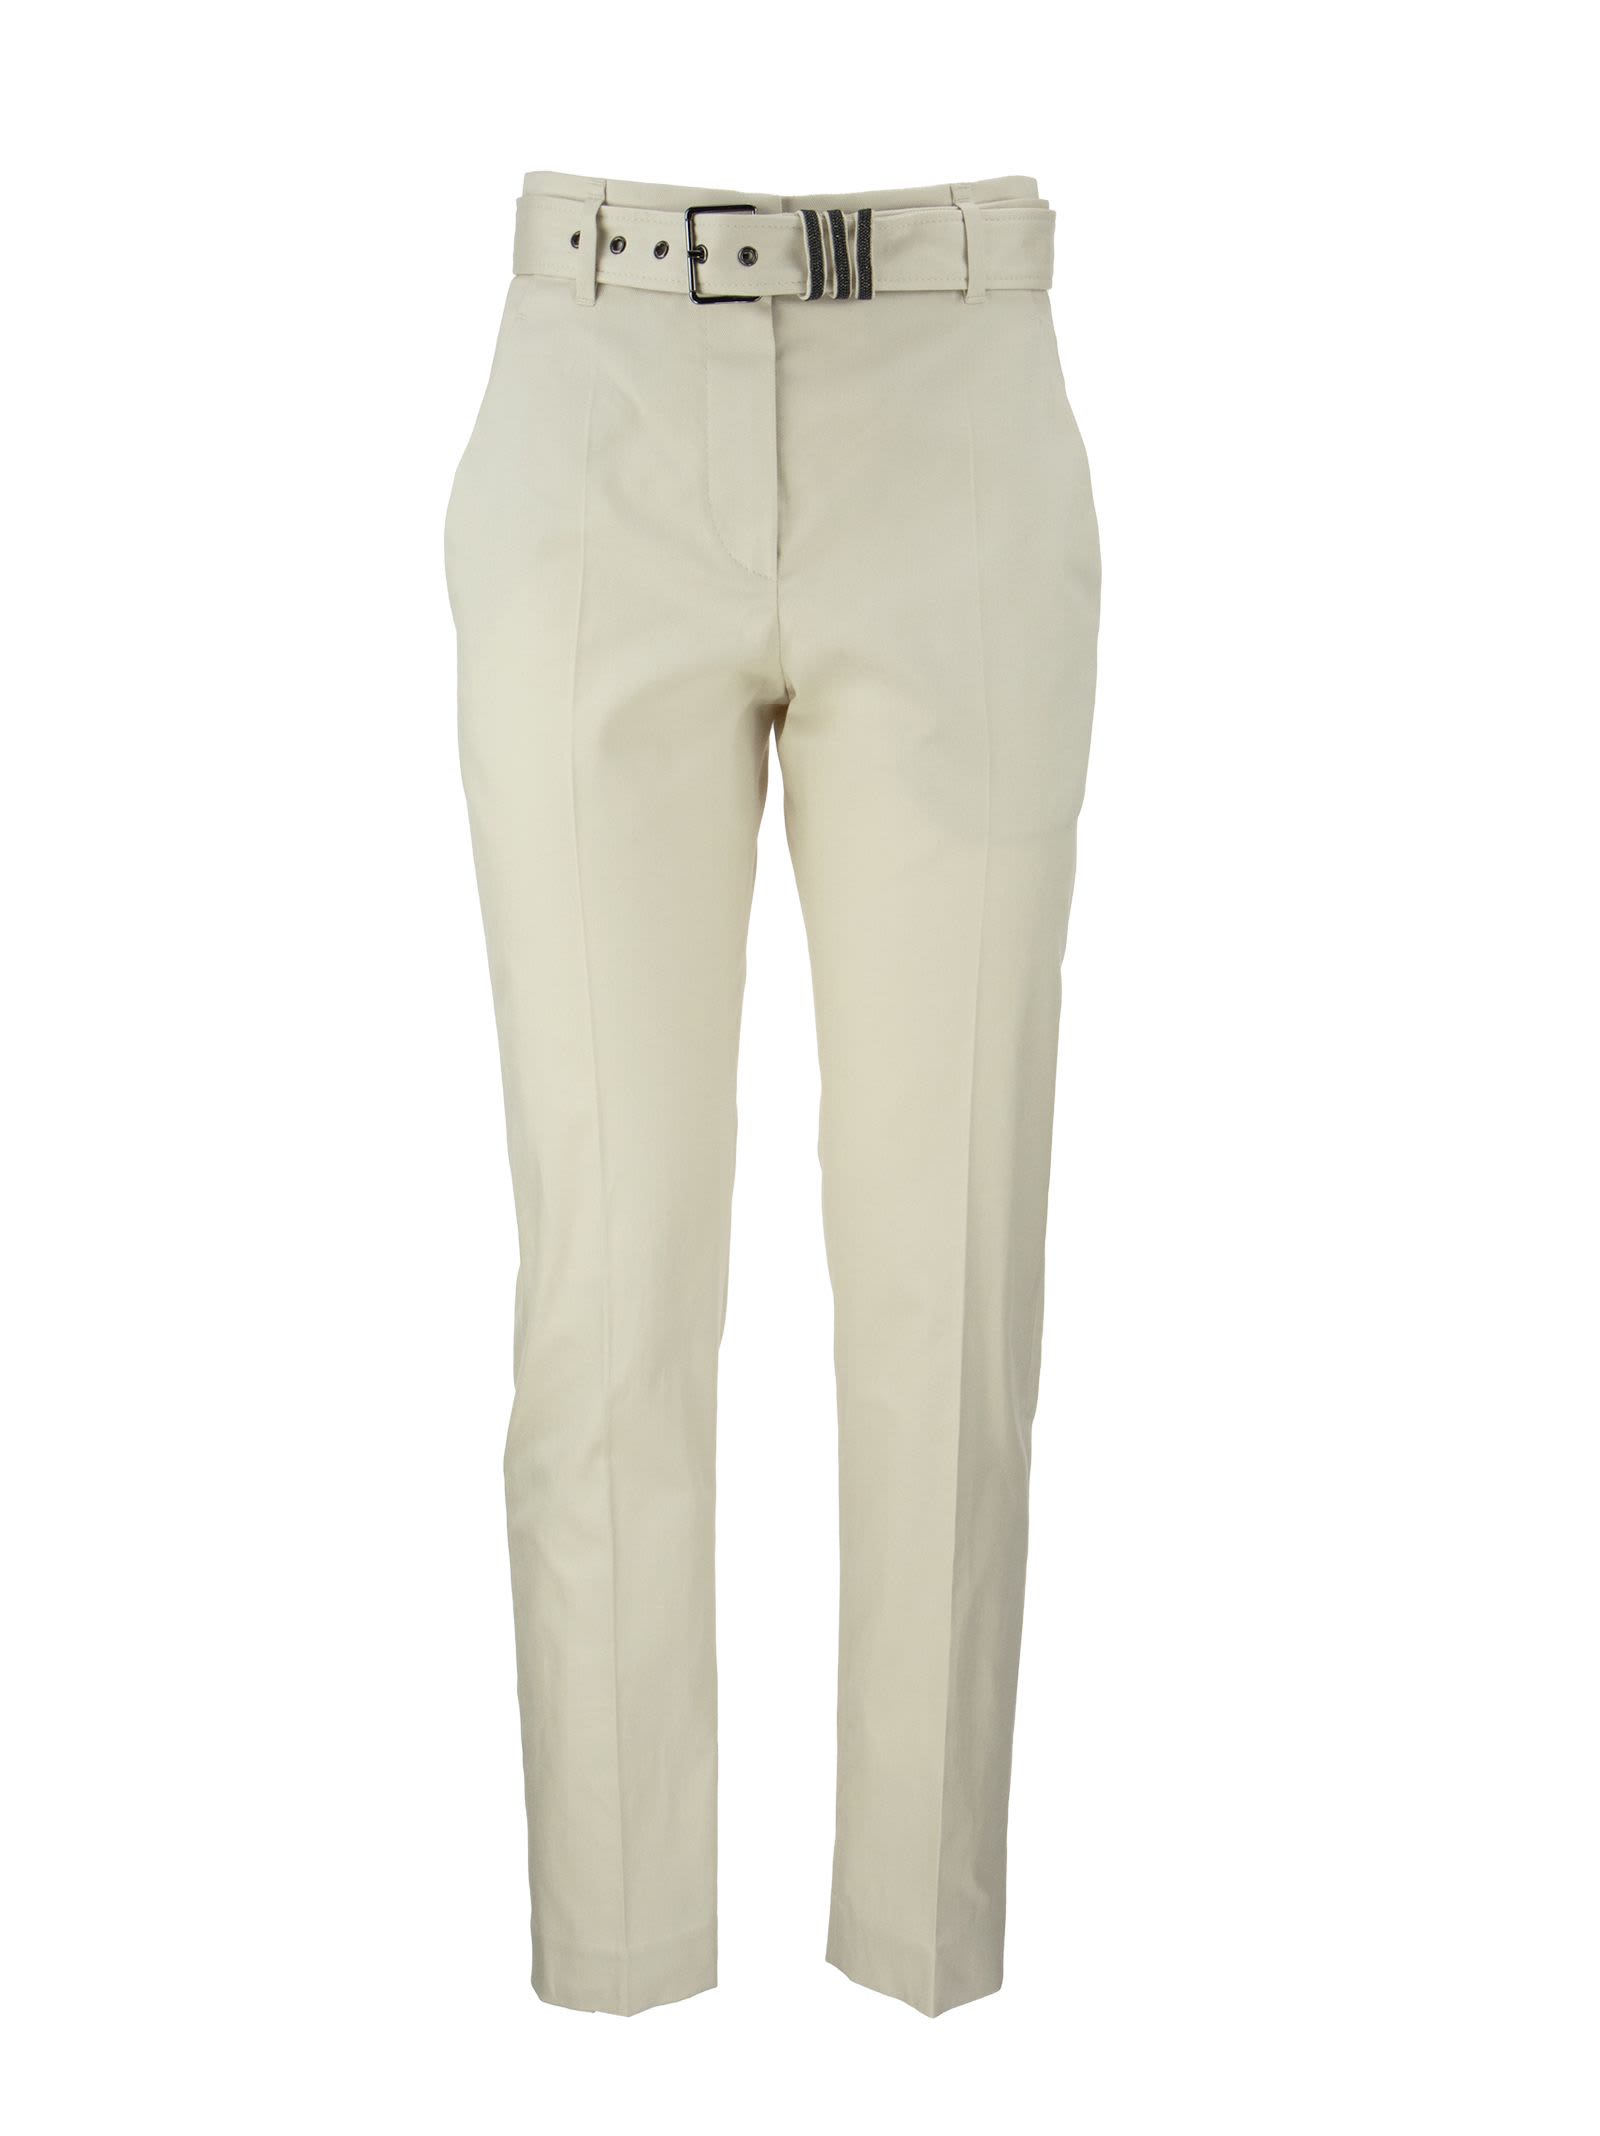 Brunello Cucinelli Comfort Cotton Twill Cigarette Trousers With Shiny Loops Belt